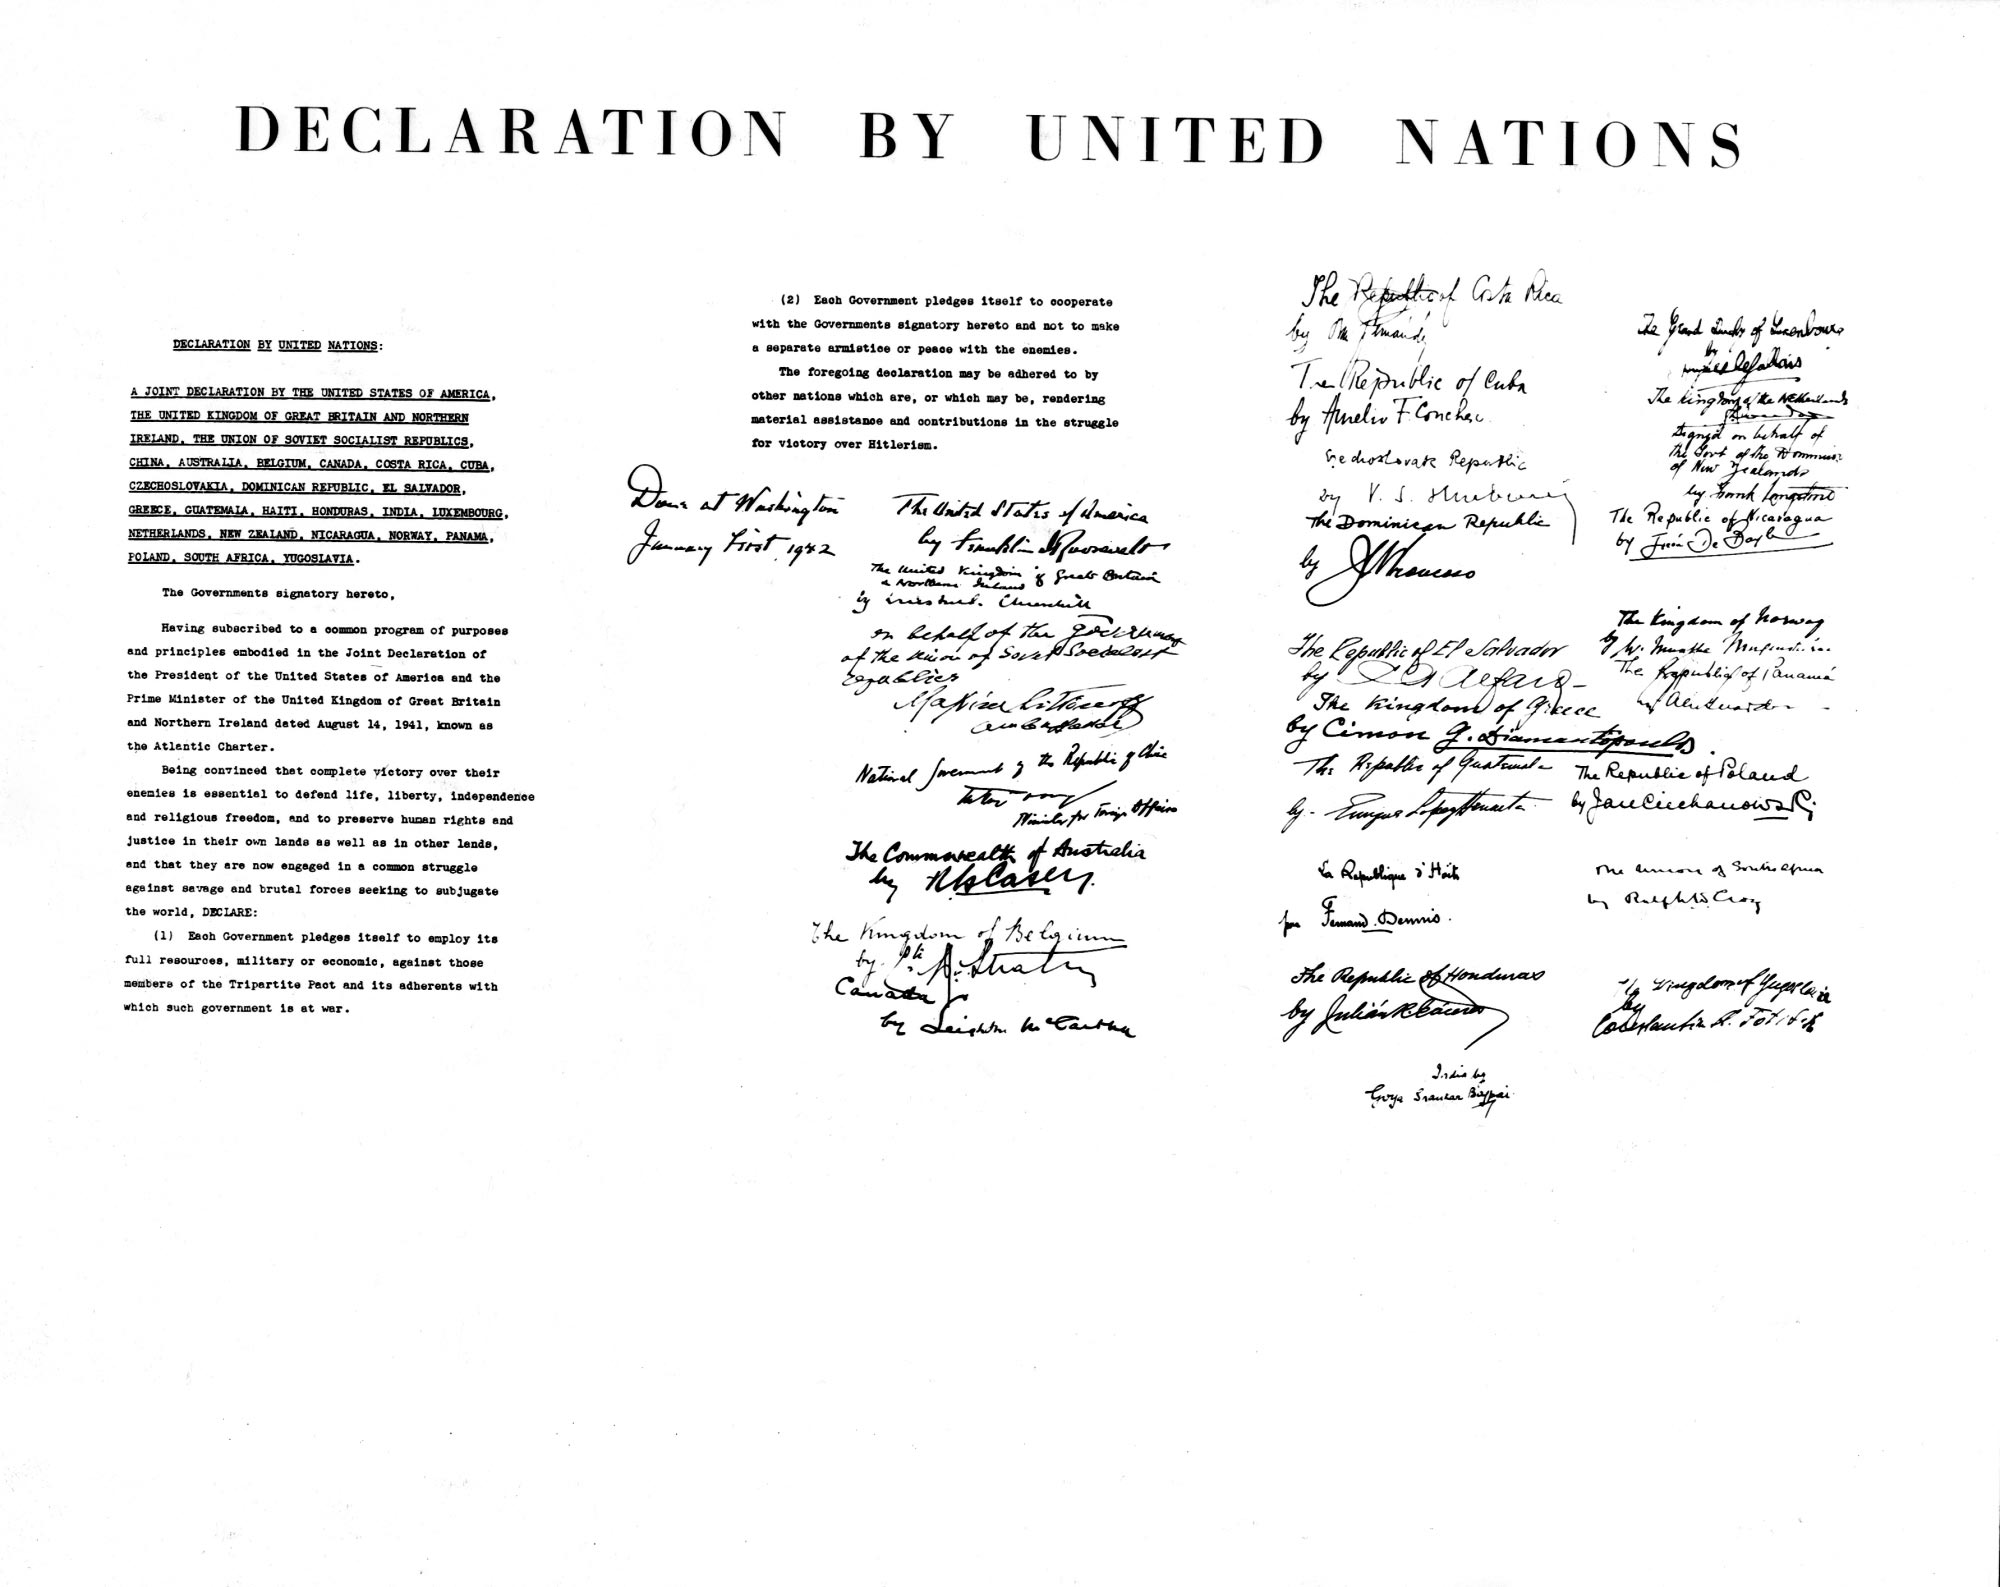 Declaration by United Nations issued in Washington, DC, on 1 January 1942.